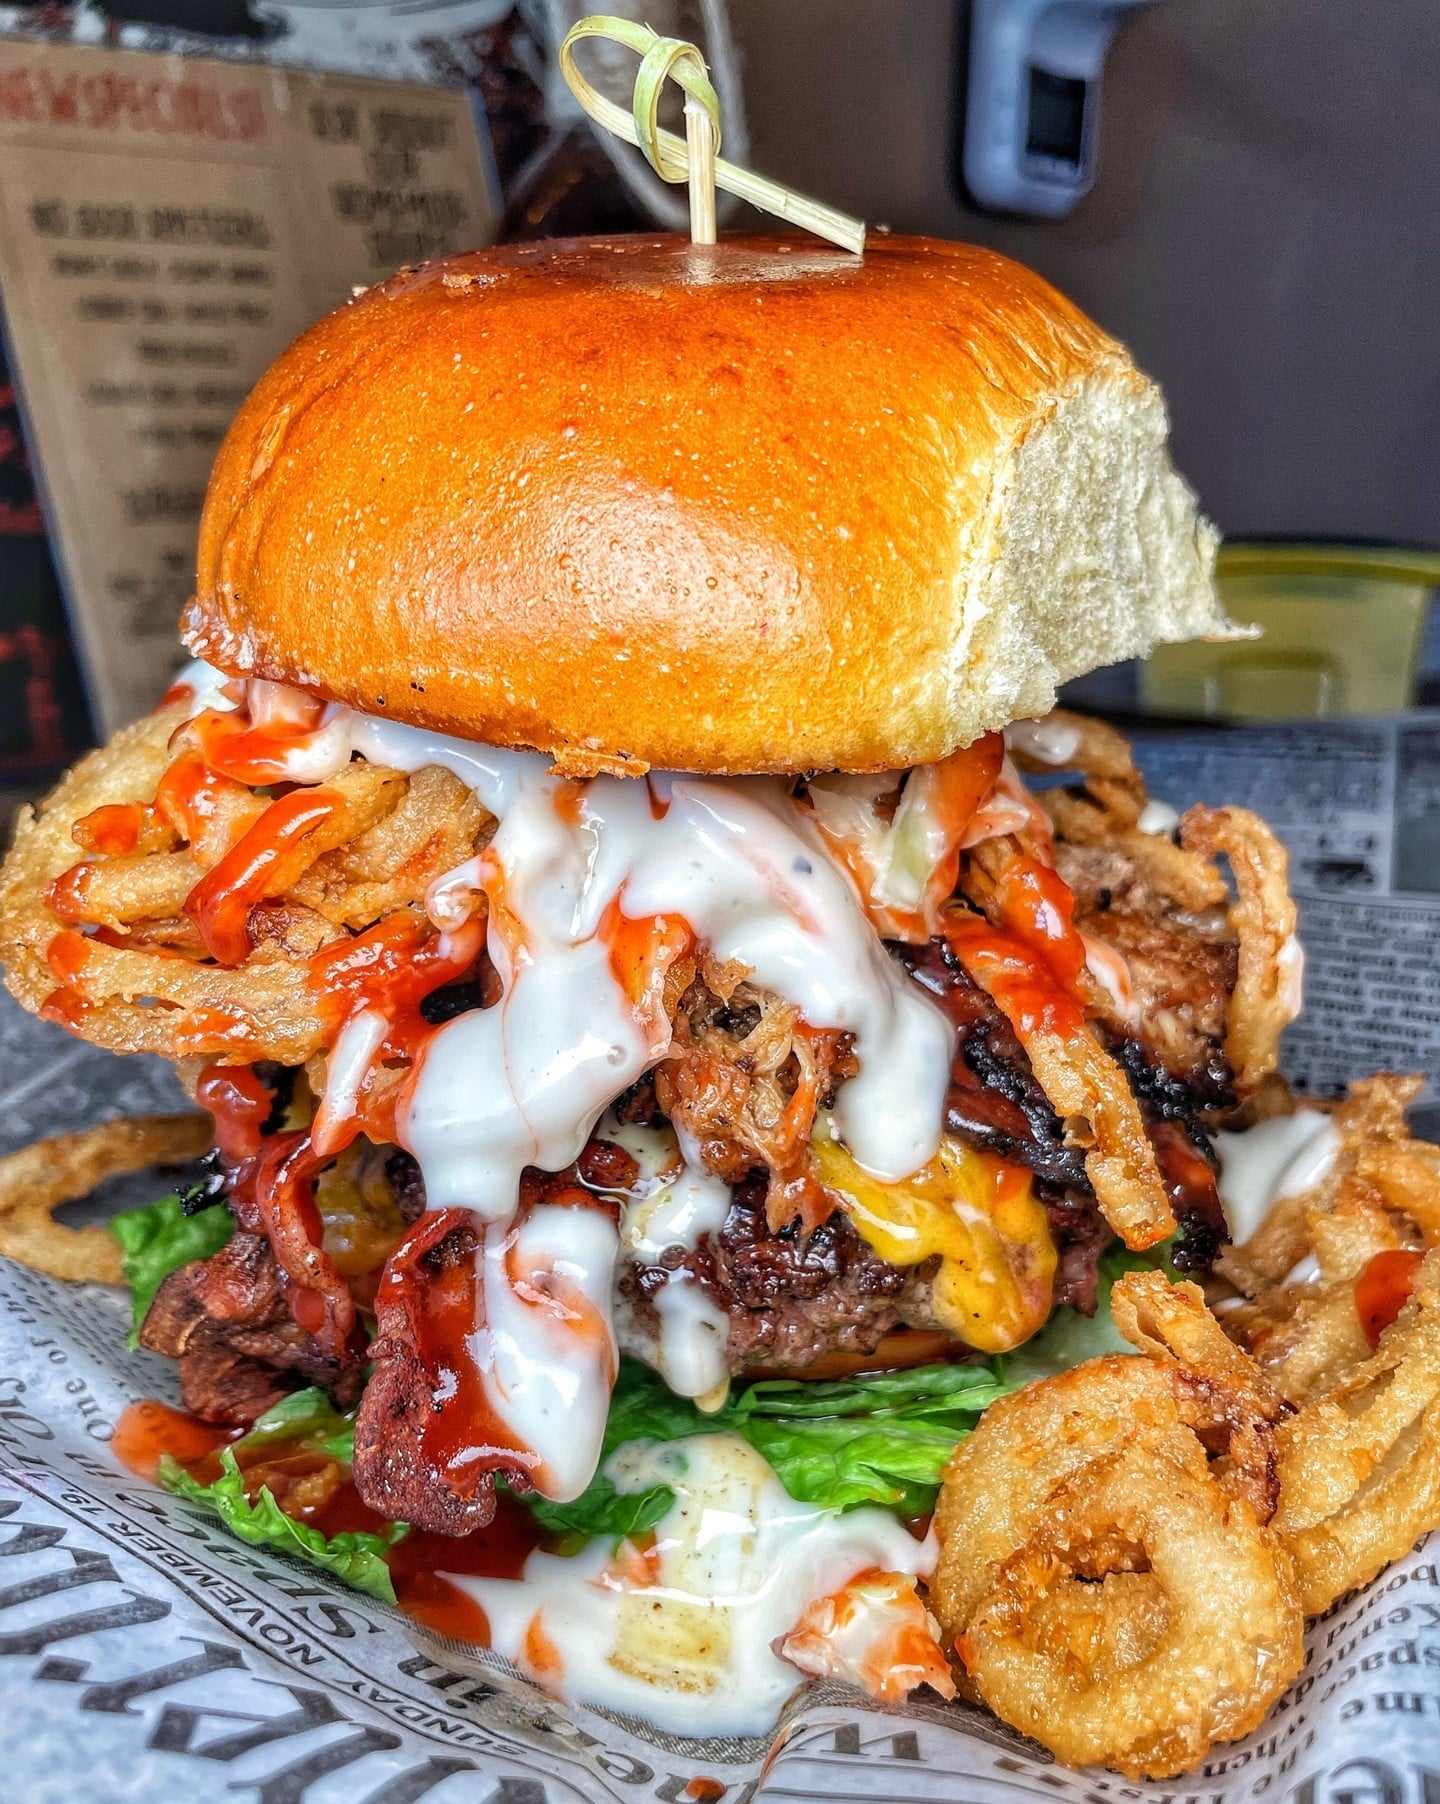 Burger topped with barbecue pulled pork, crispy bacon, cheddar, lettuce, tomato, cripsy onion straws, and cole slaw smothered with a barbecue and ranch combo served on a brioche bun.